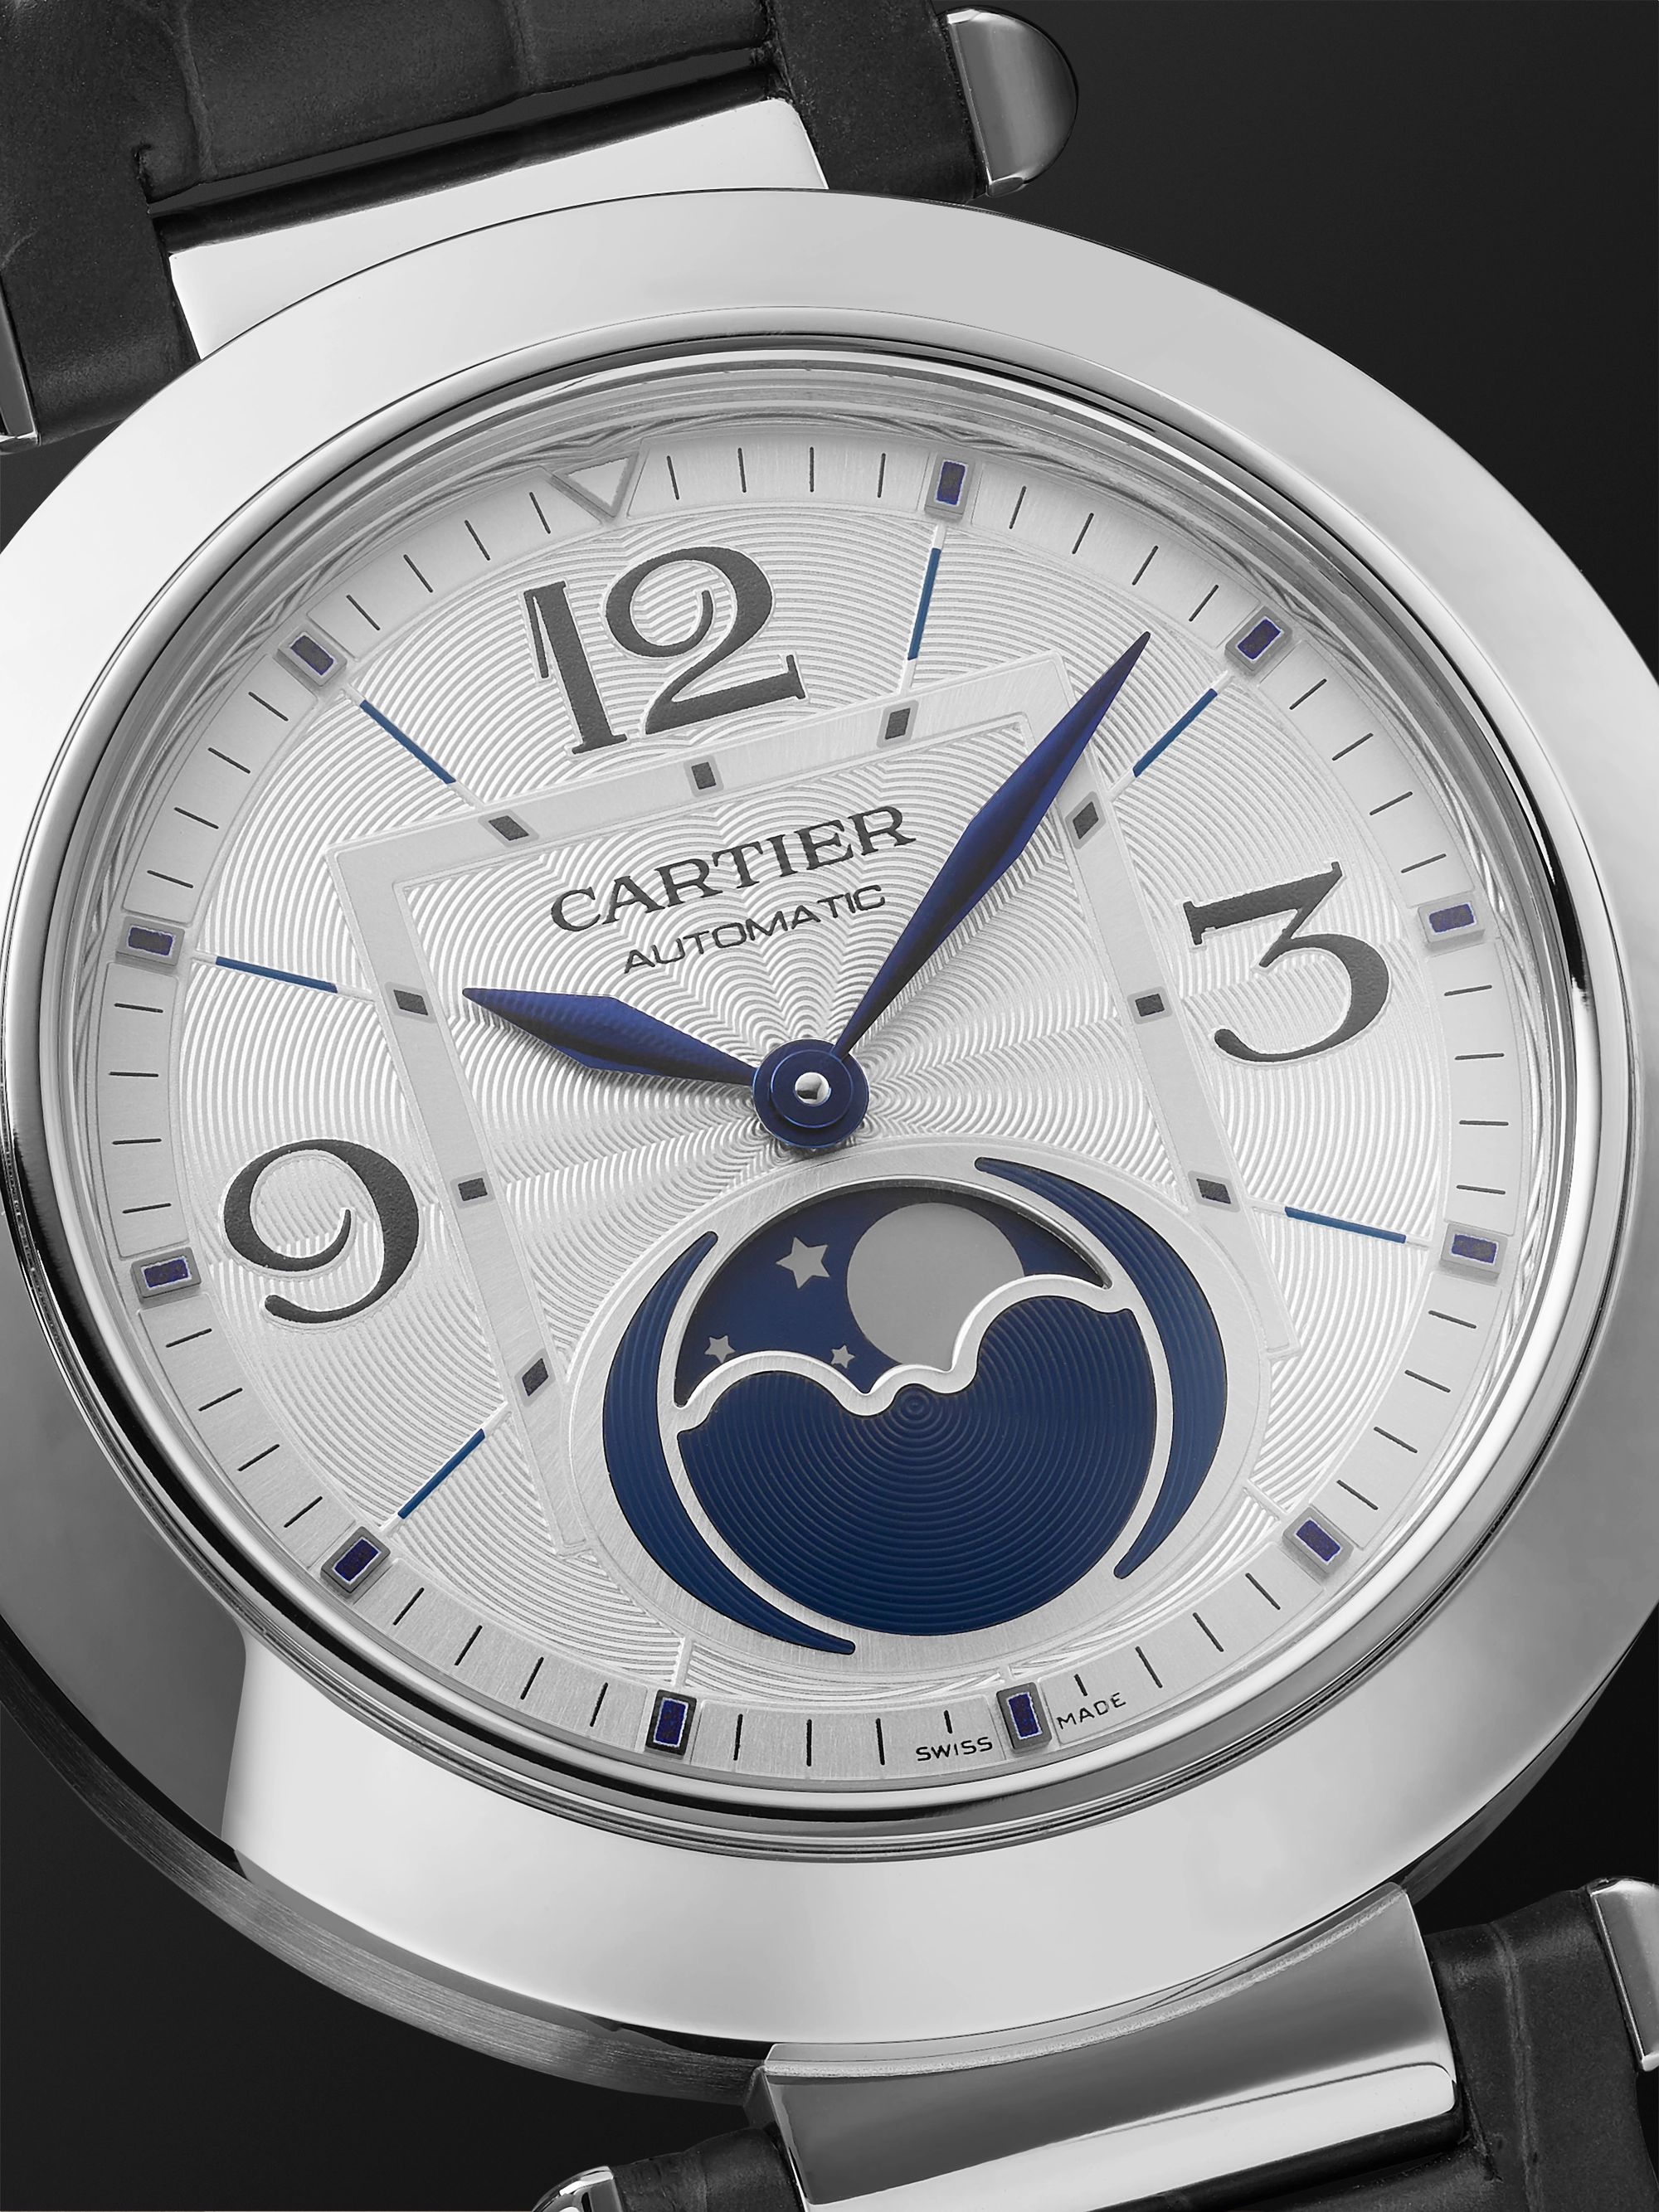 CARTIER Pasha de Cartier Automatic 41mm Stainless Steel and Alligator Watch, Ref. No. WSPA0030